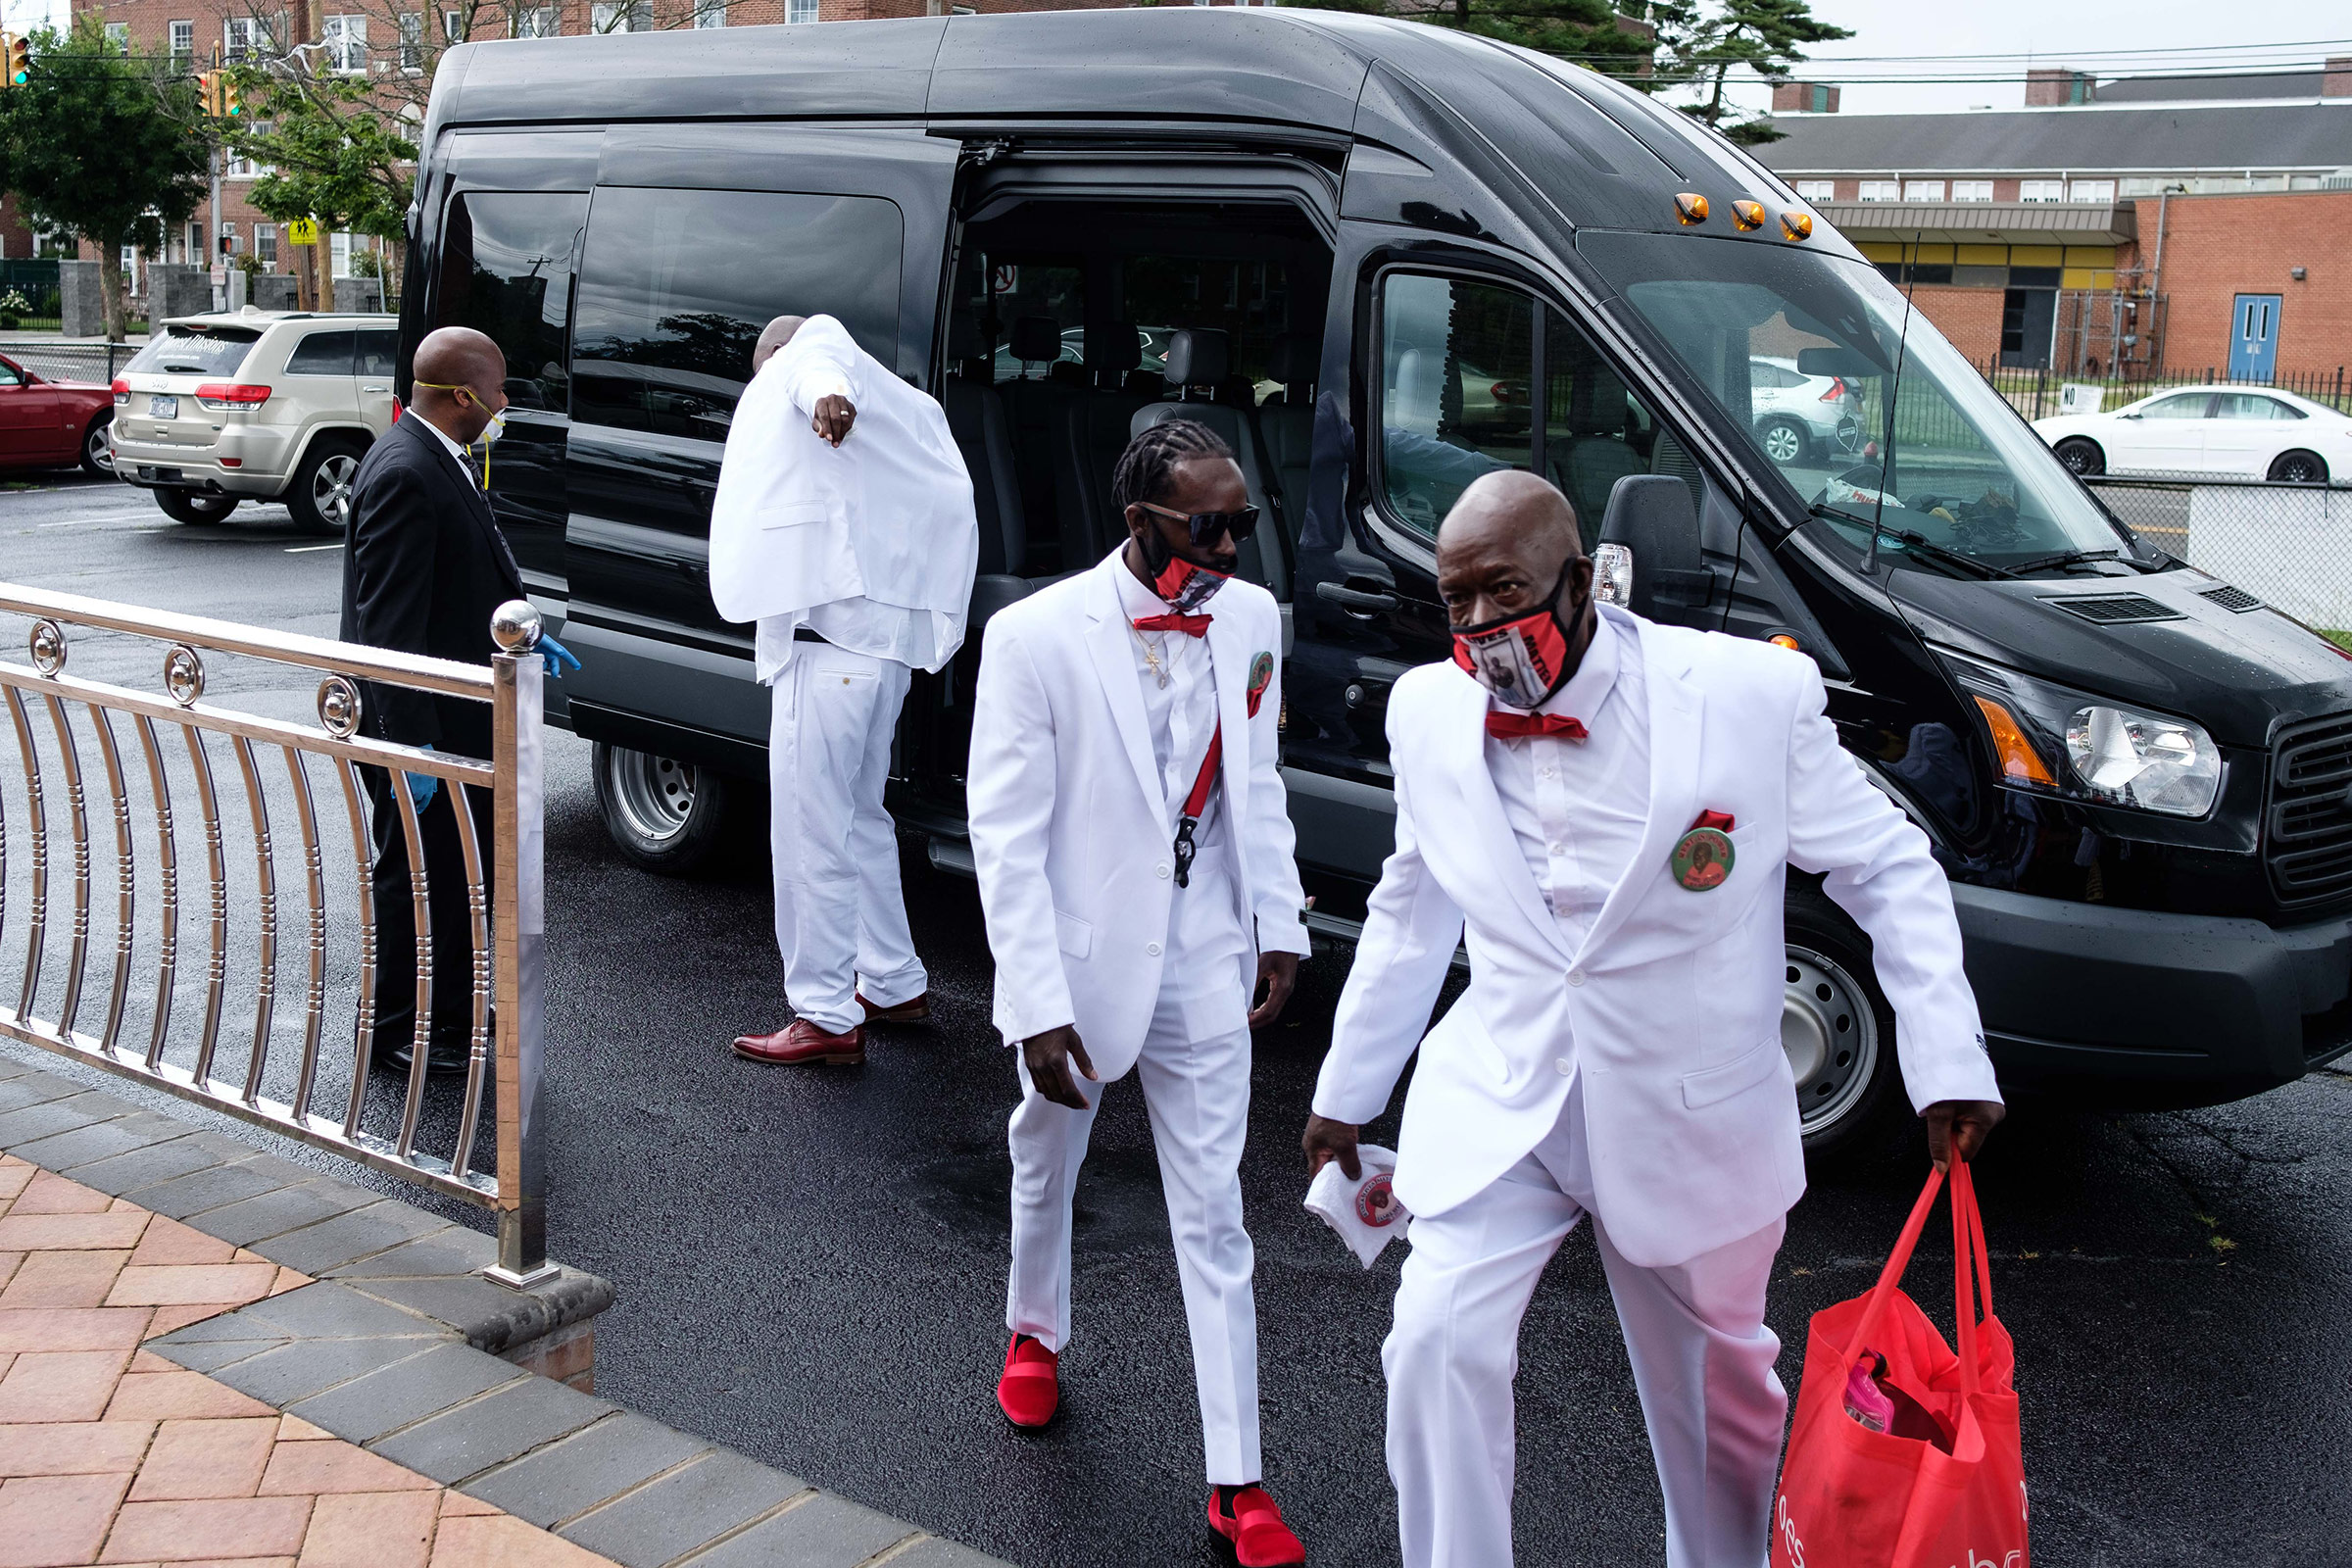 Jamel Floyd’s father and brothers arrive at Judea United Baptist Church for Jamel's funeral in Hempstead, N.Y., on June 30.